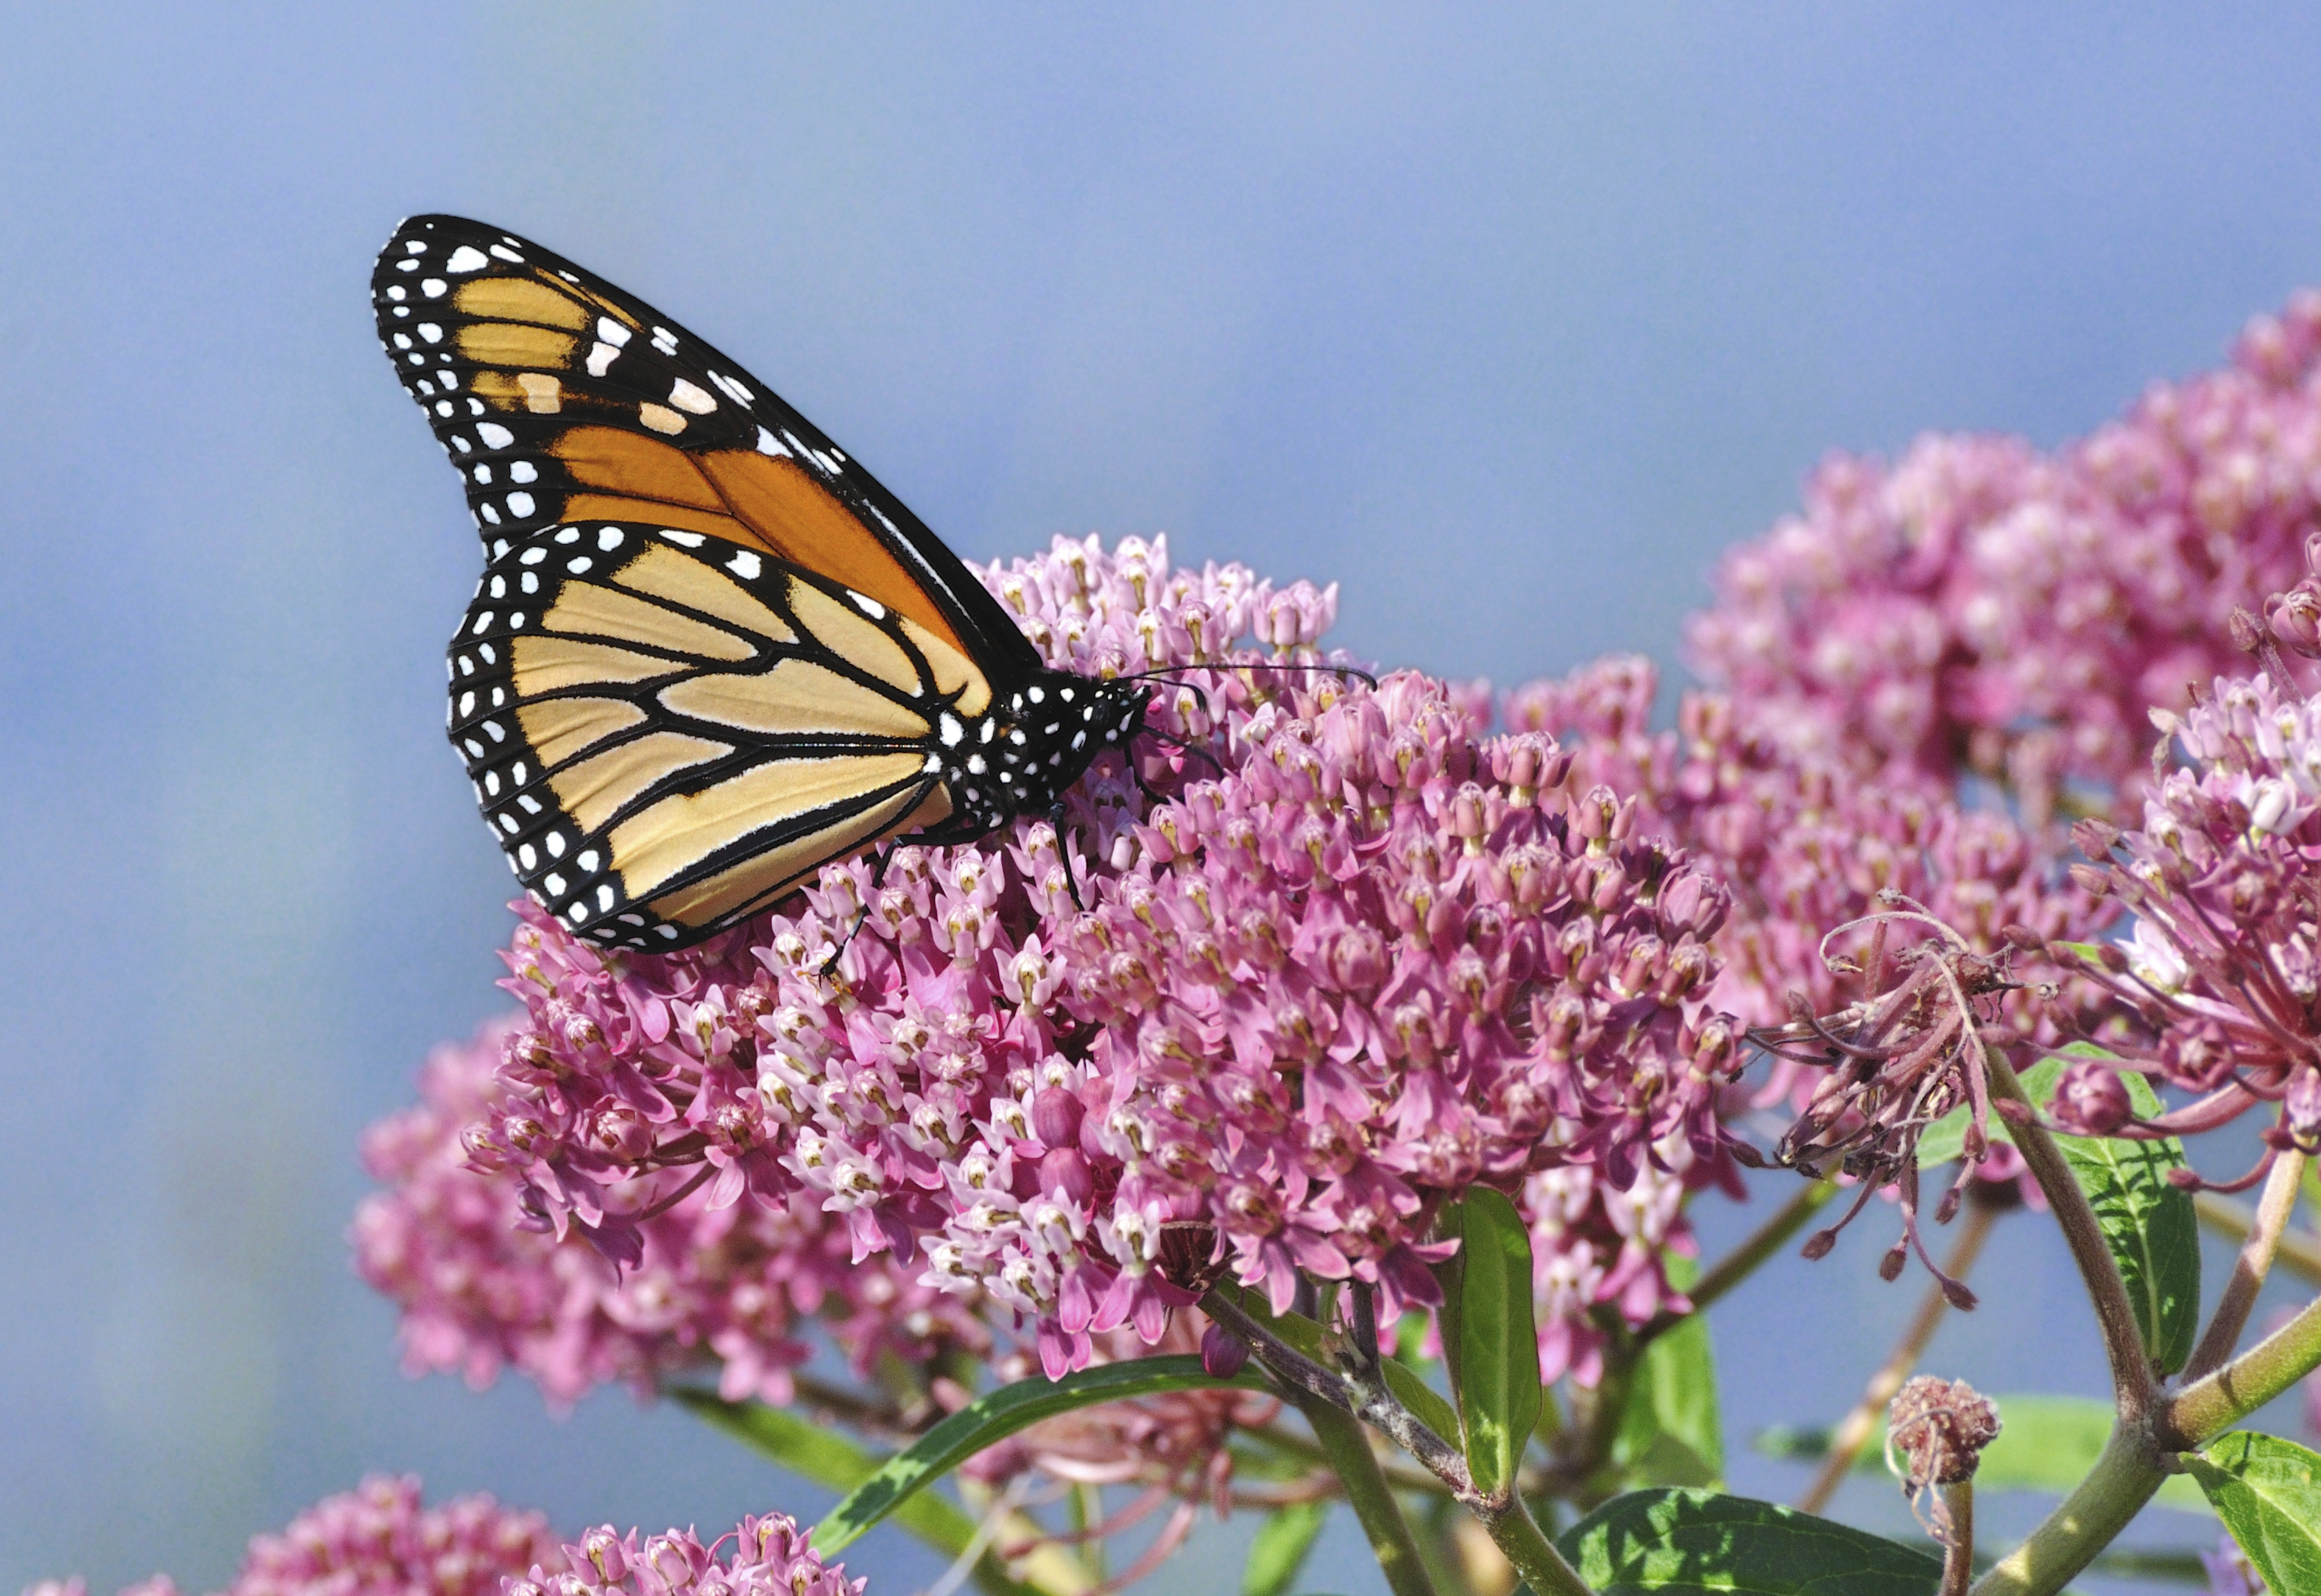 Regulation Poses Biggest Threat to Monarch Butterflies | Competitive ...